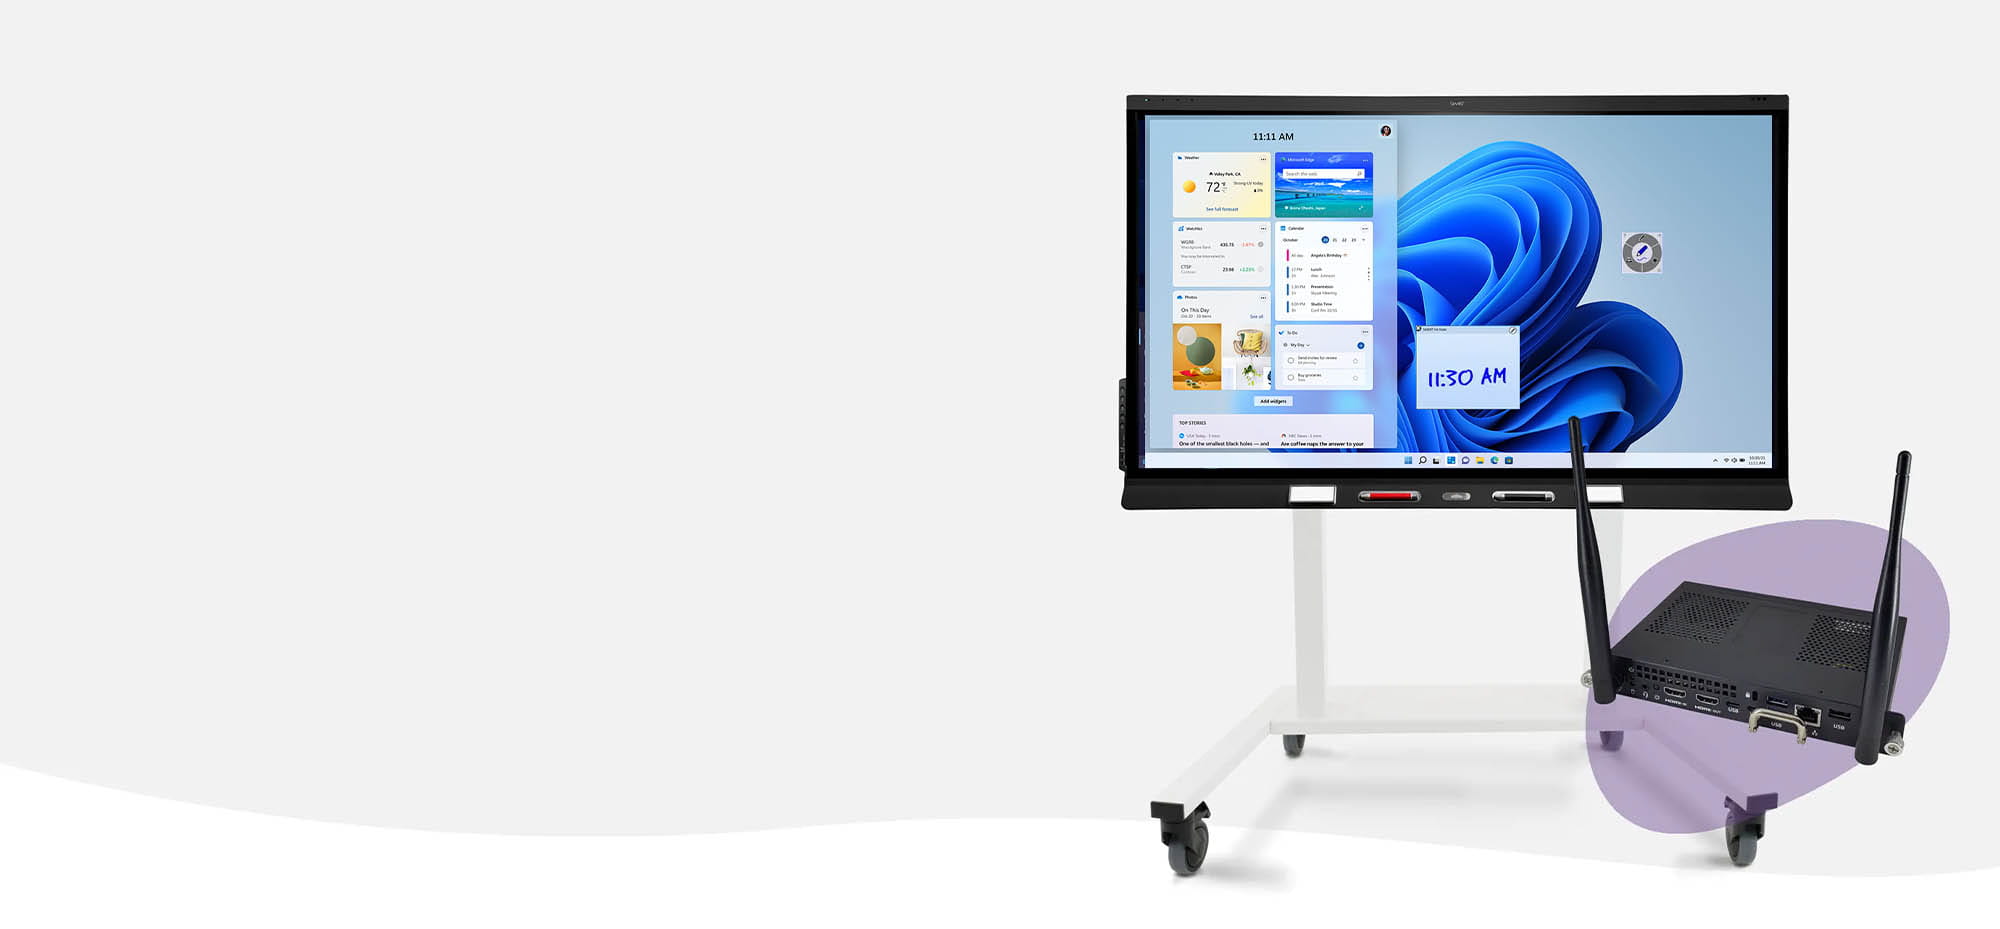 A sleek SMART Board display paired with easy-to-install computing modules, showcasing its user-friendly interface.